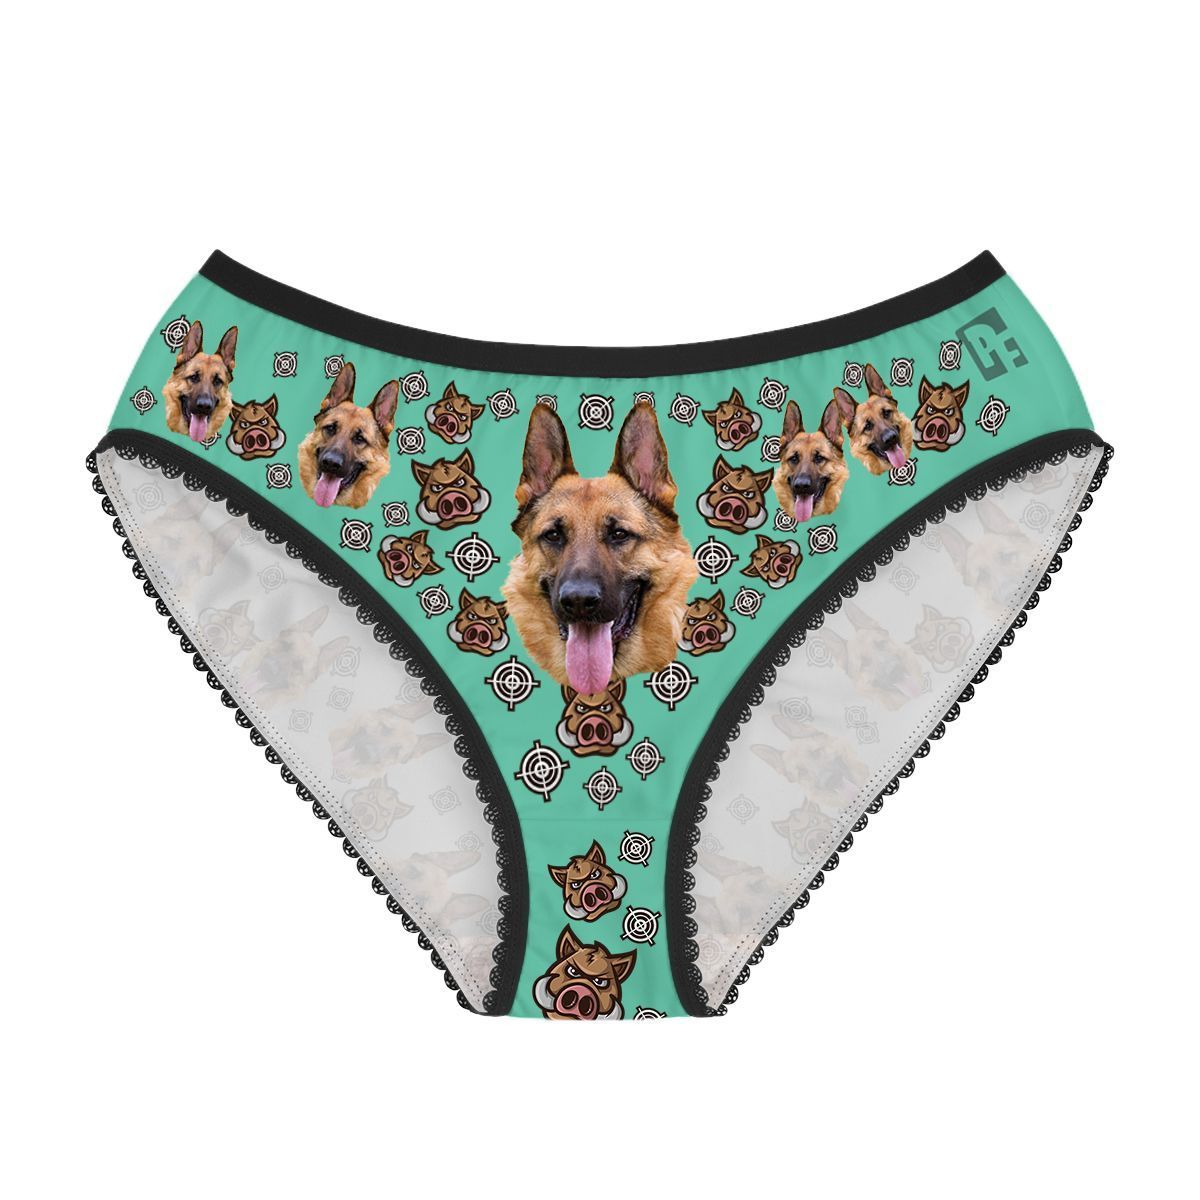 Mint Boar Hunter women's underwear briefs personalized with photo printed on them